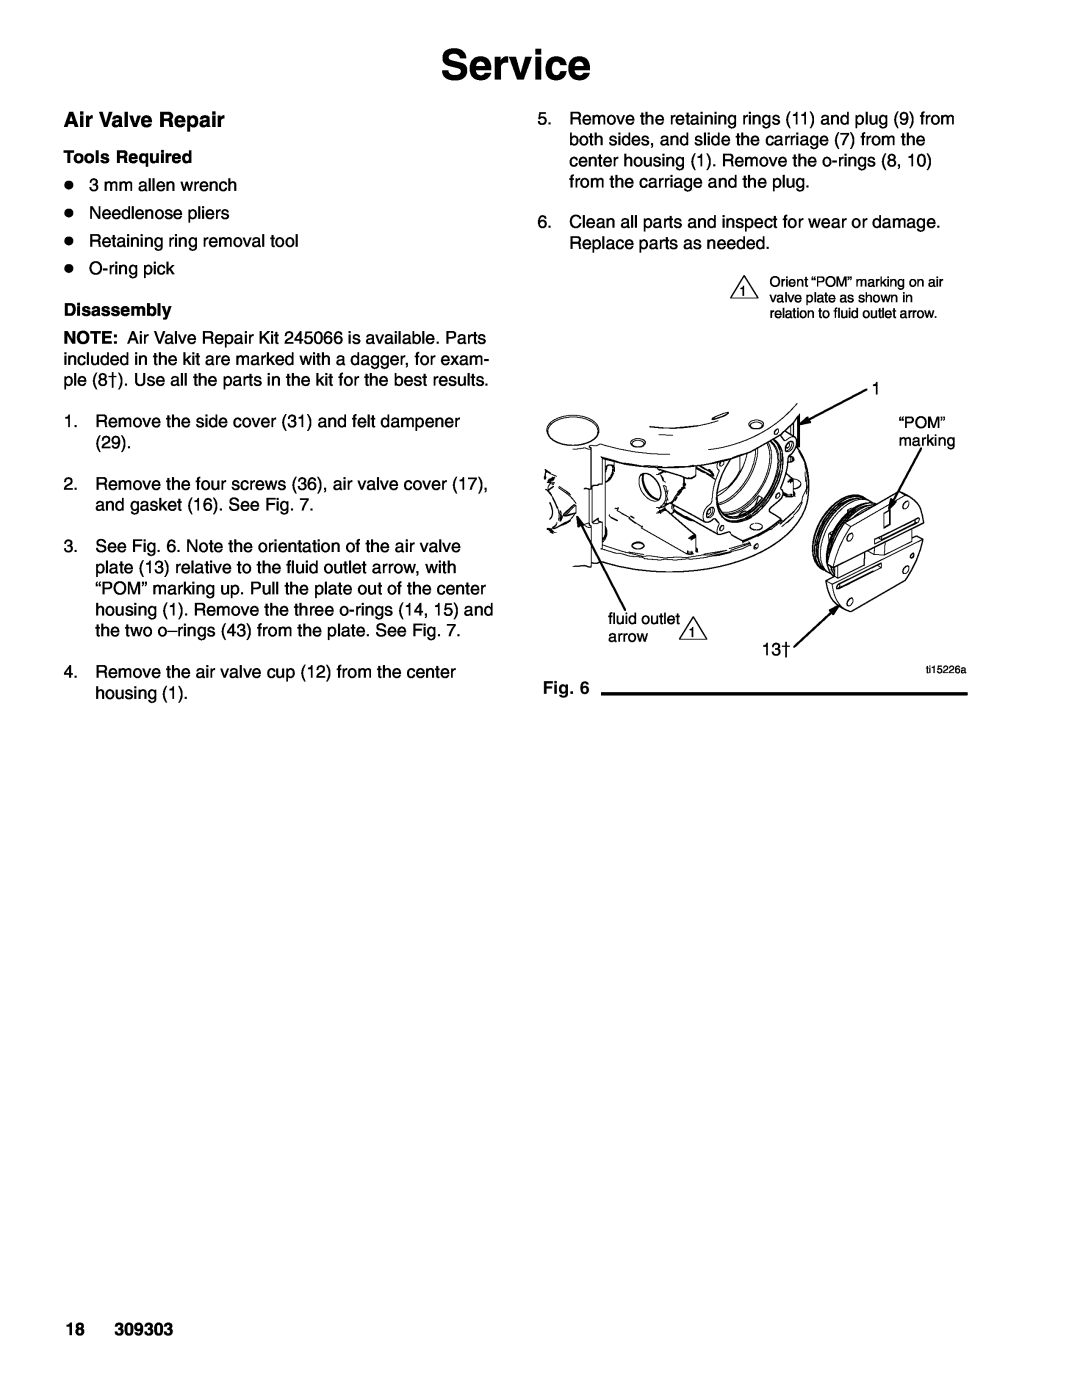 Graco 233501, 233776, 233500, 233777 important safety instructions Service, Air Valve Repair, Tools Required, Disassembly 